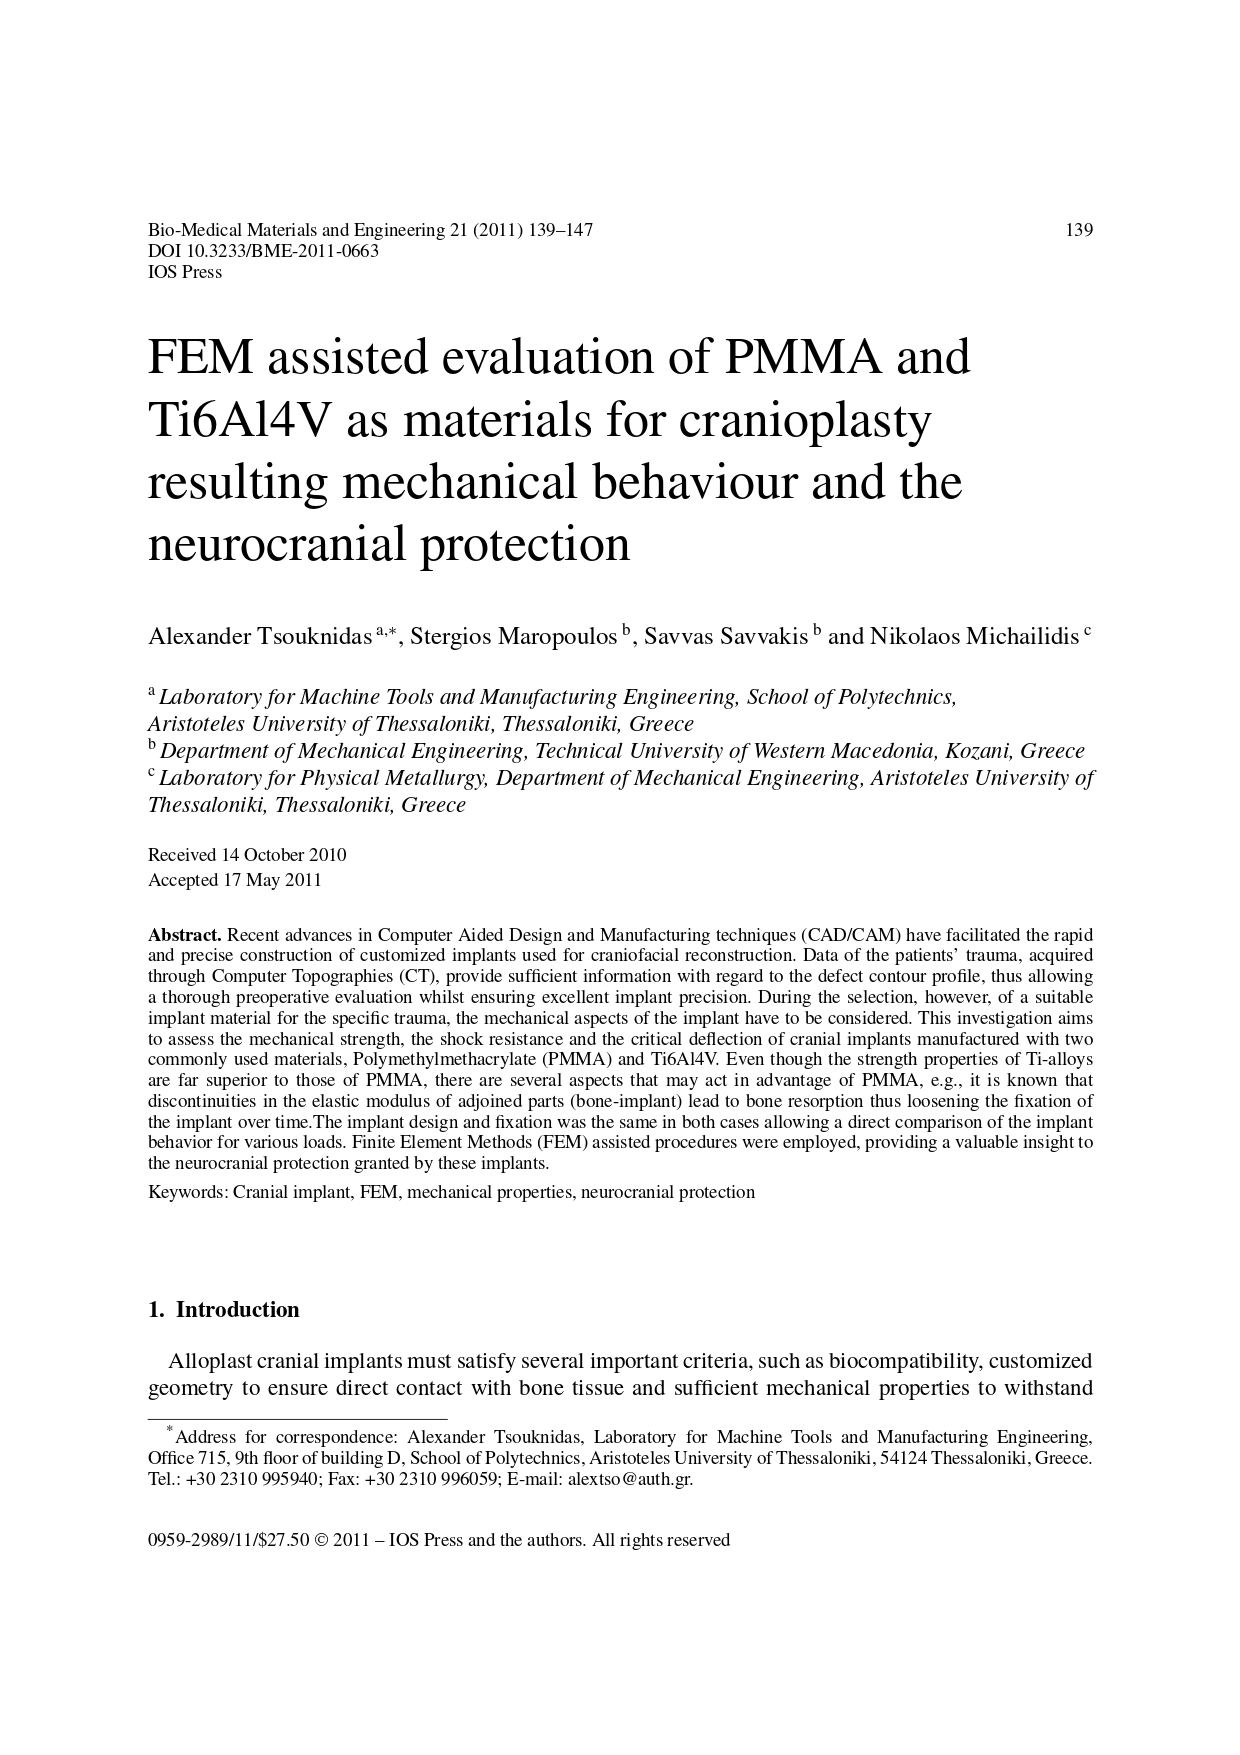 FEM assisted evaluation of PMMA and Ti6Al4V as materials for cranioplasty resulting mechanical behaviour and the neurocranial protection_page-0001.jpg